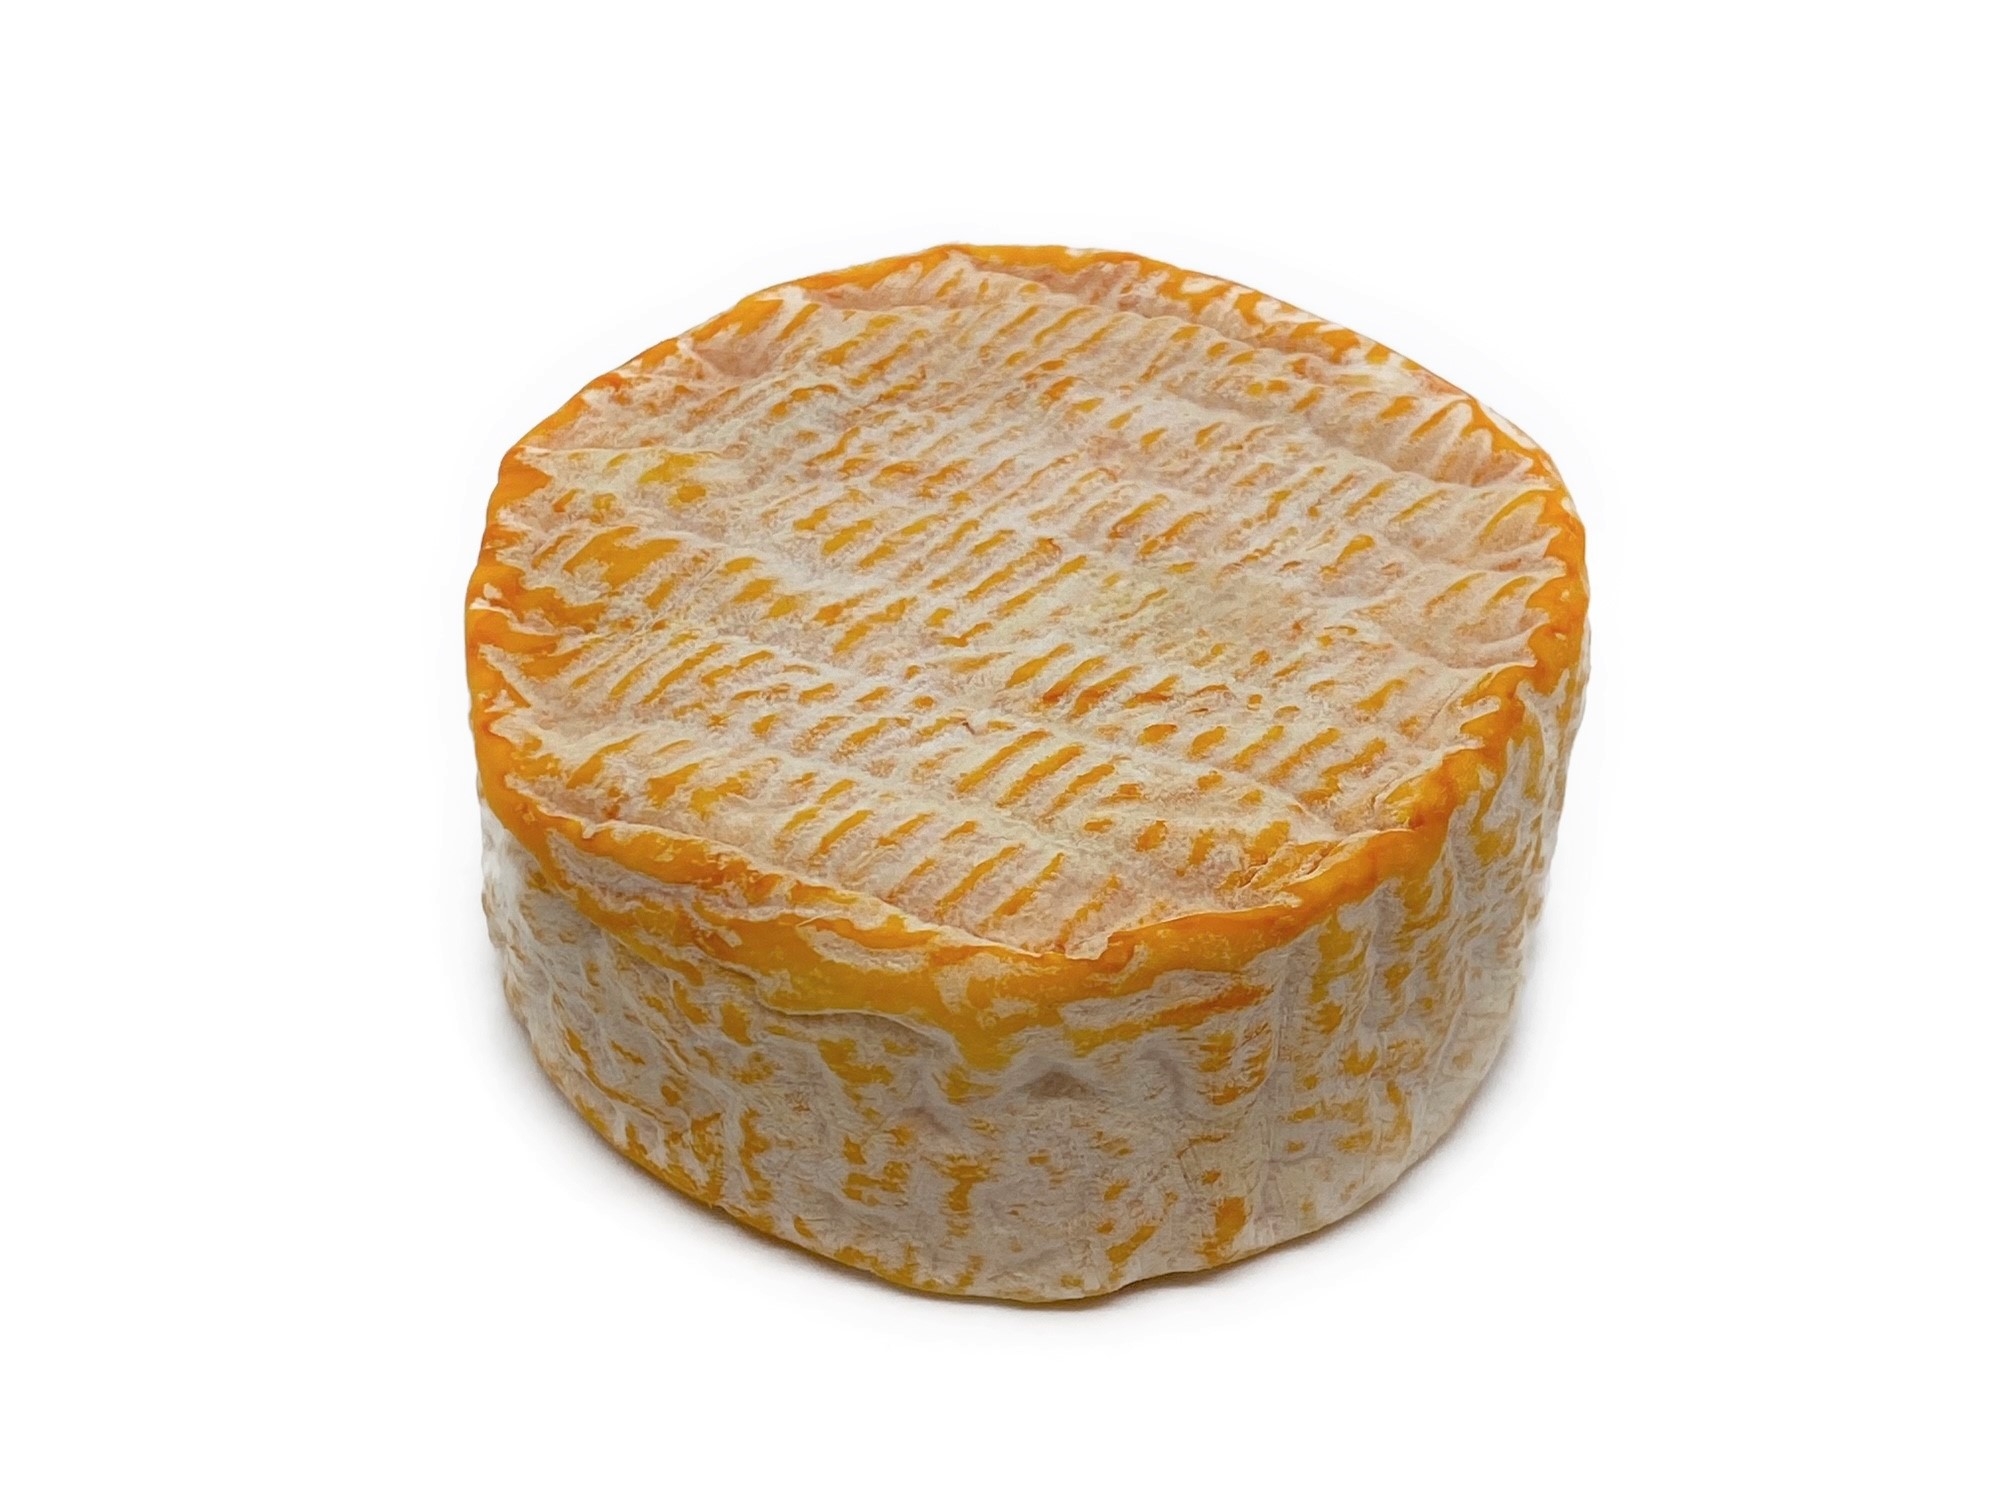 Côte d'Or le fromage - HESS